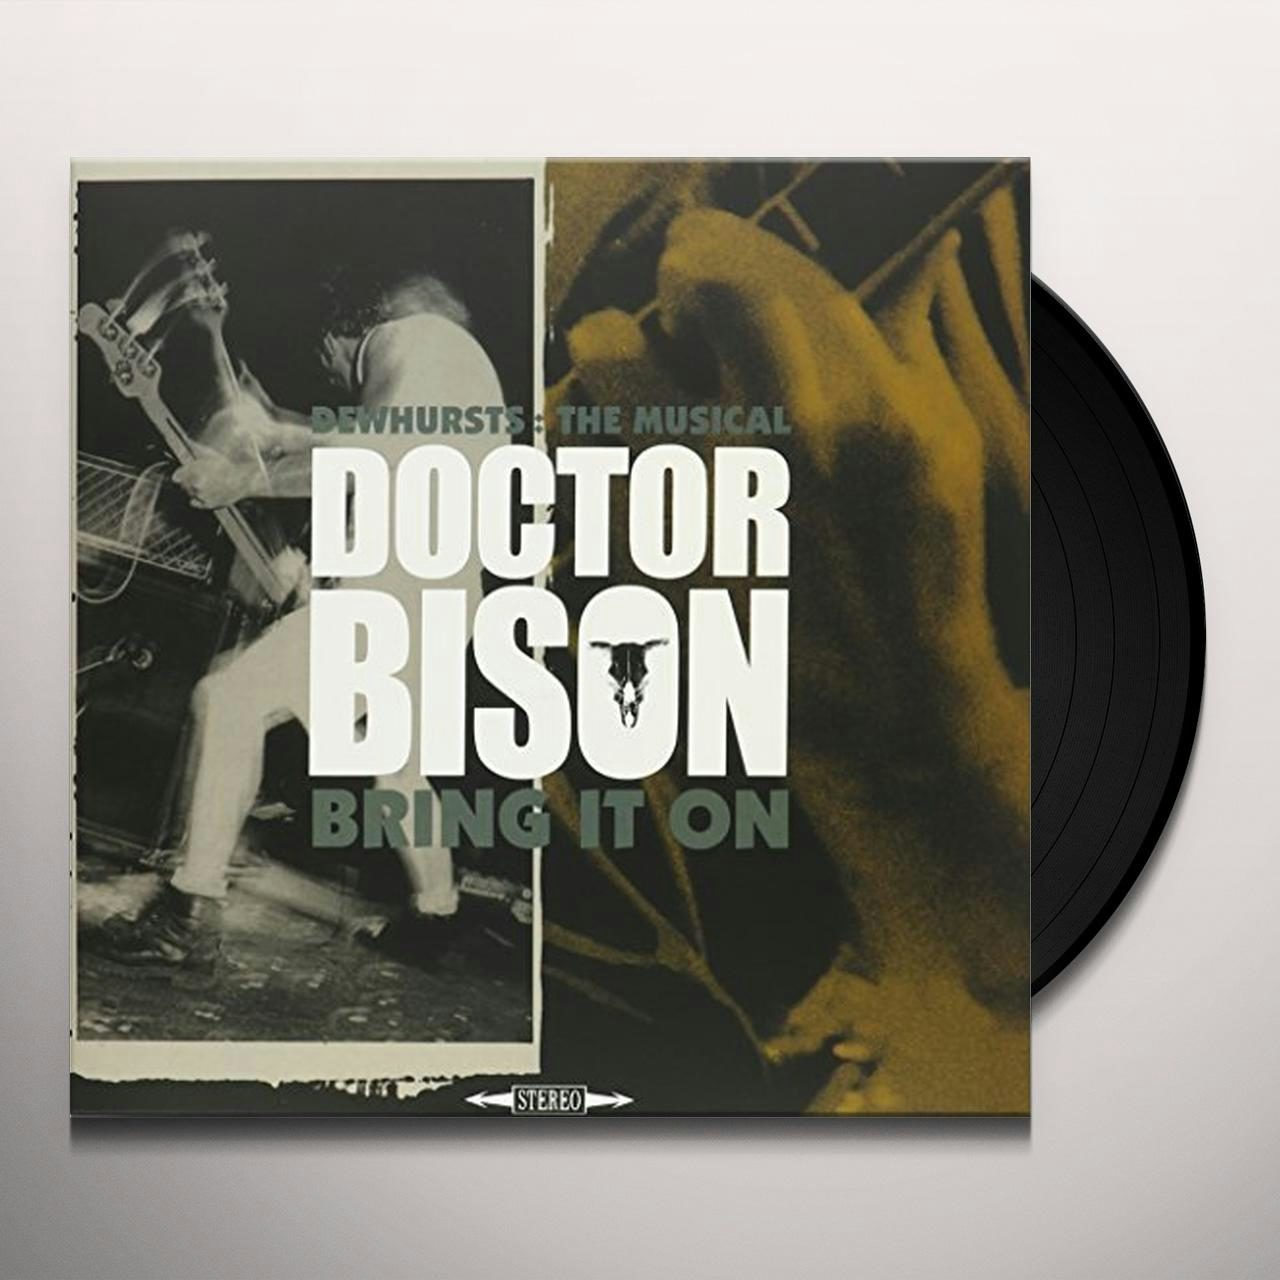 dewhurts: the musical / bring it on cd - Doctor Bison